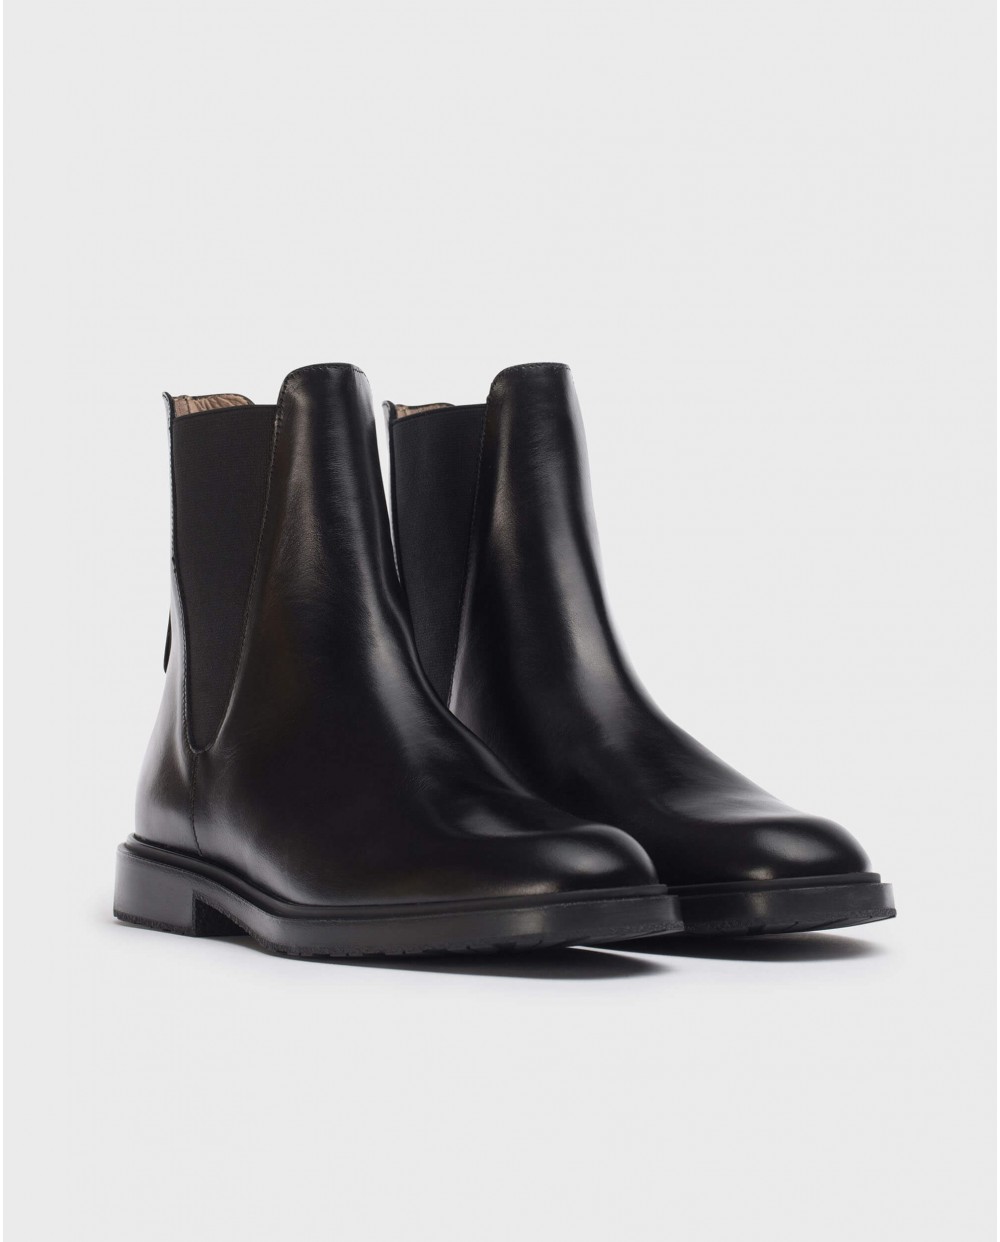 Wonders-Ankle Boots-Black Scar Ankle Boot